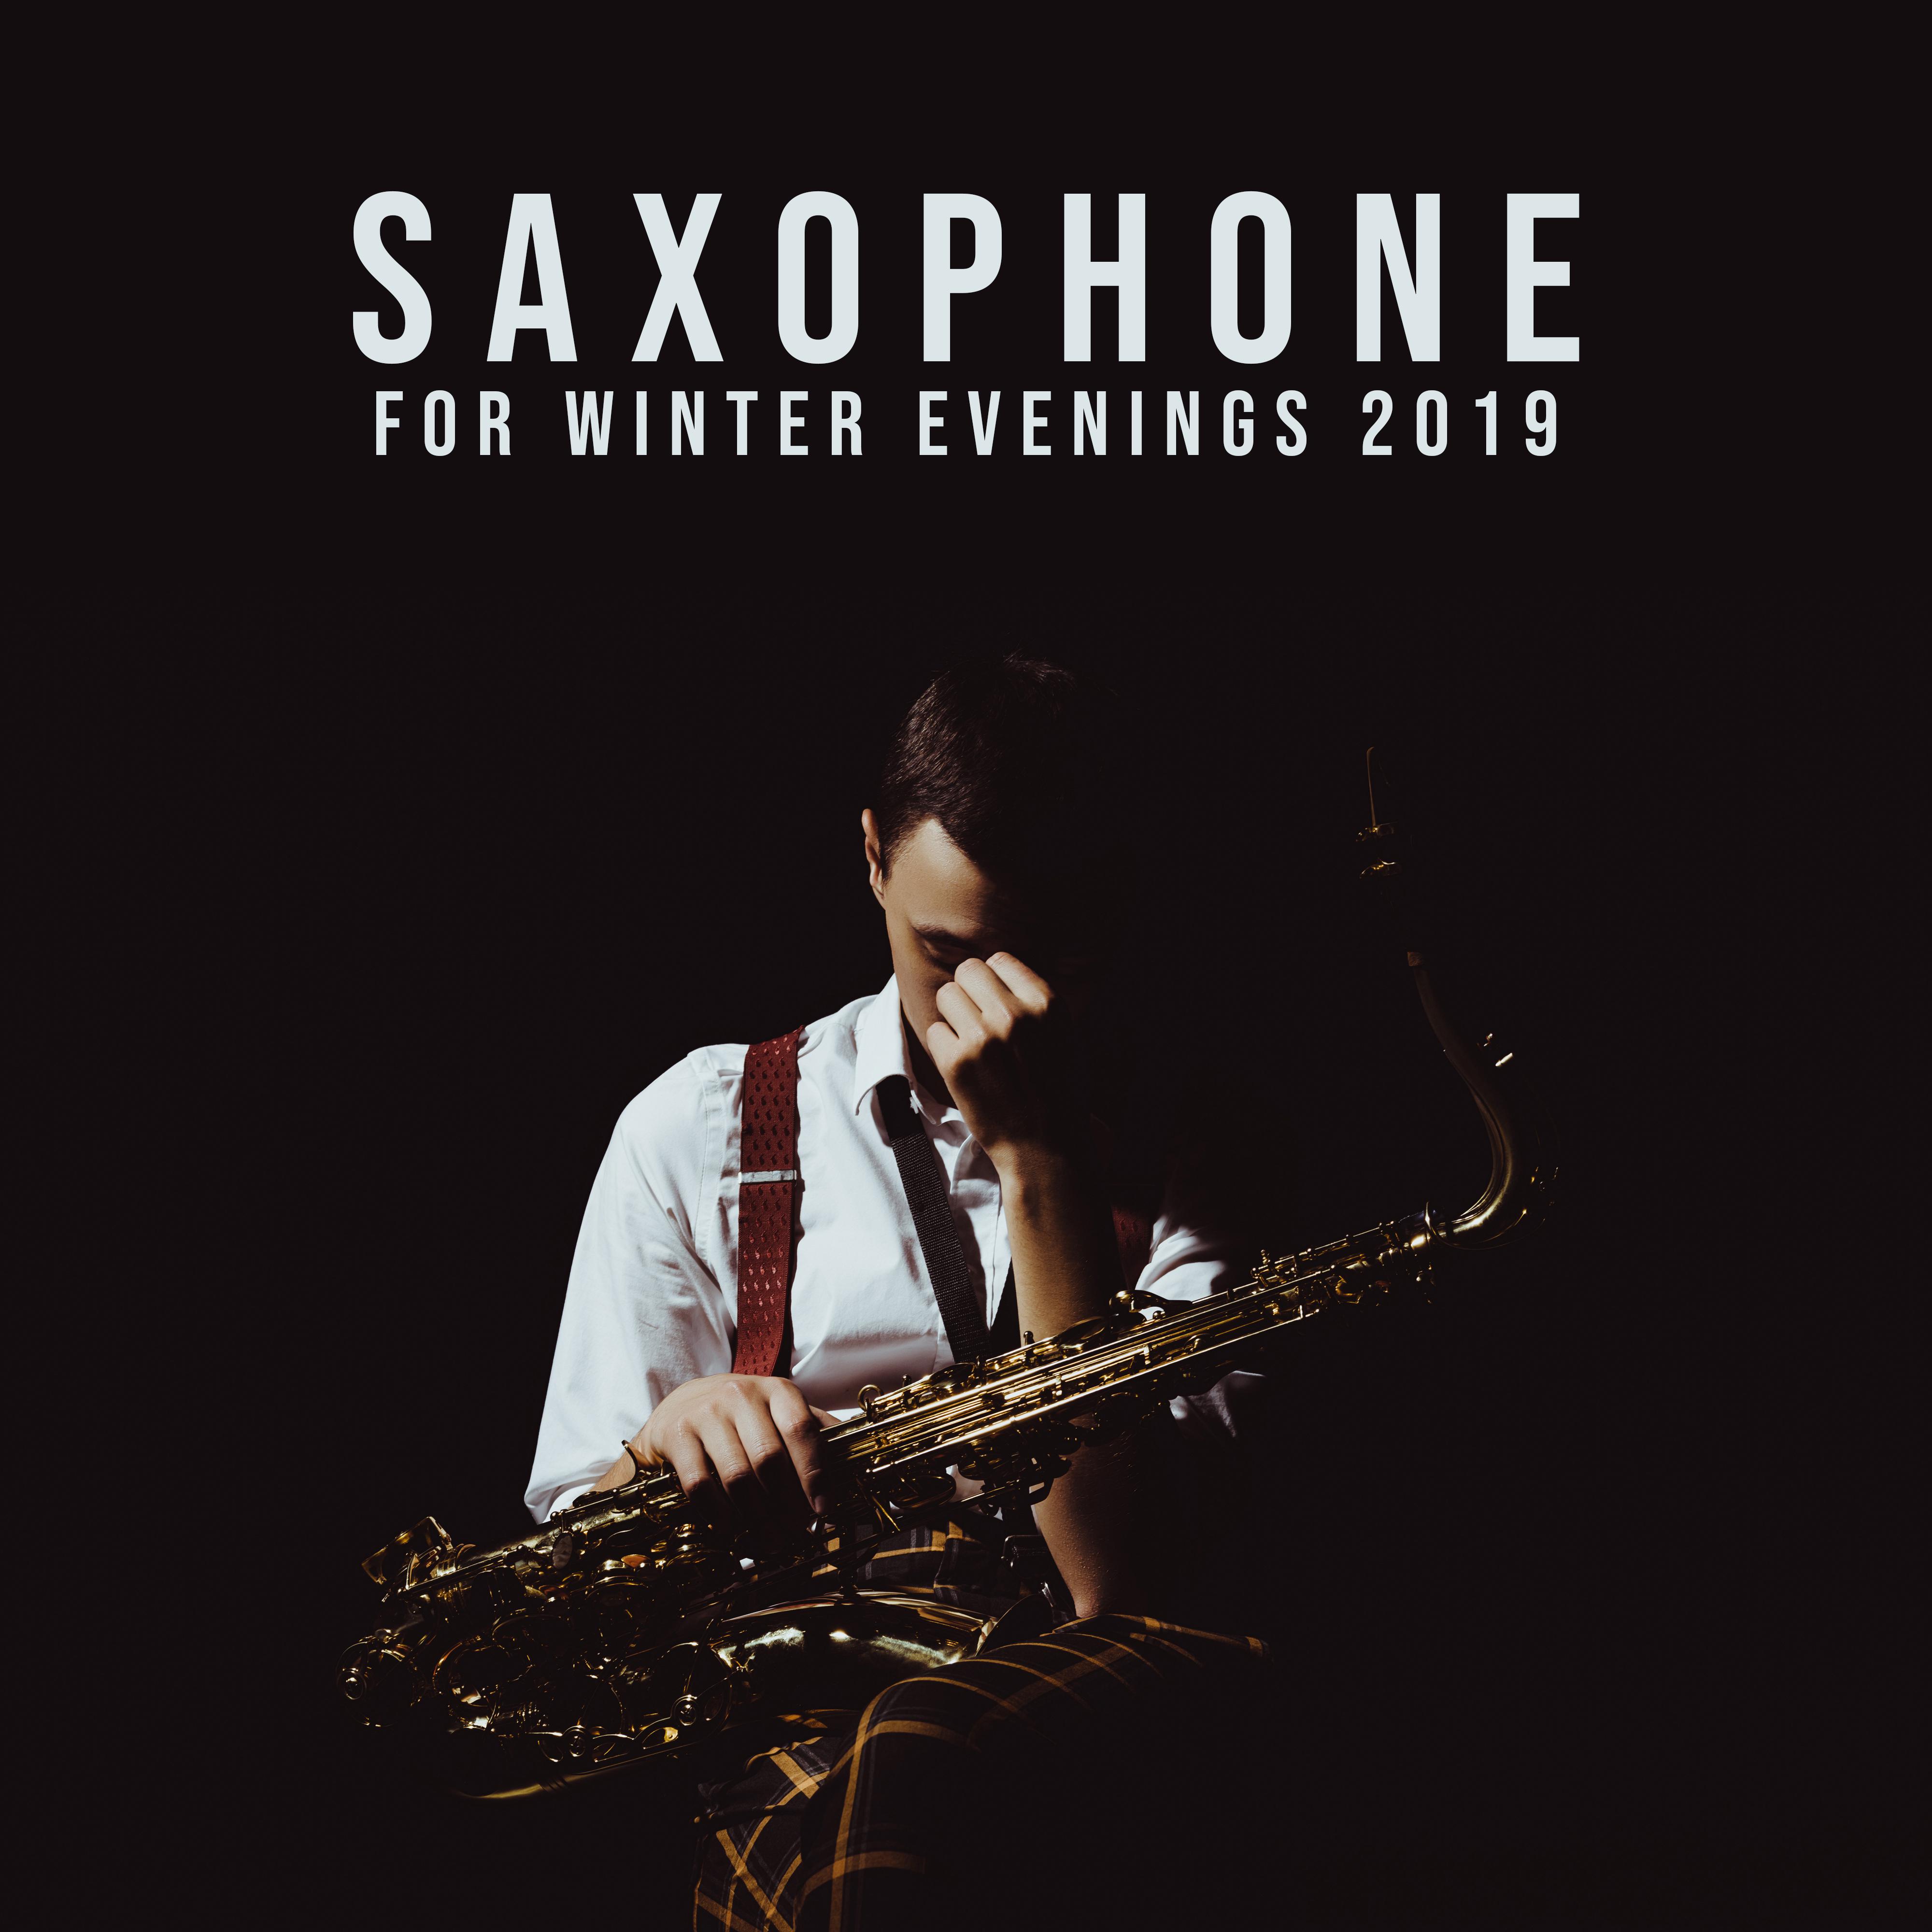 Saxophone for Winter Evenings 2019